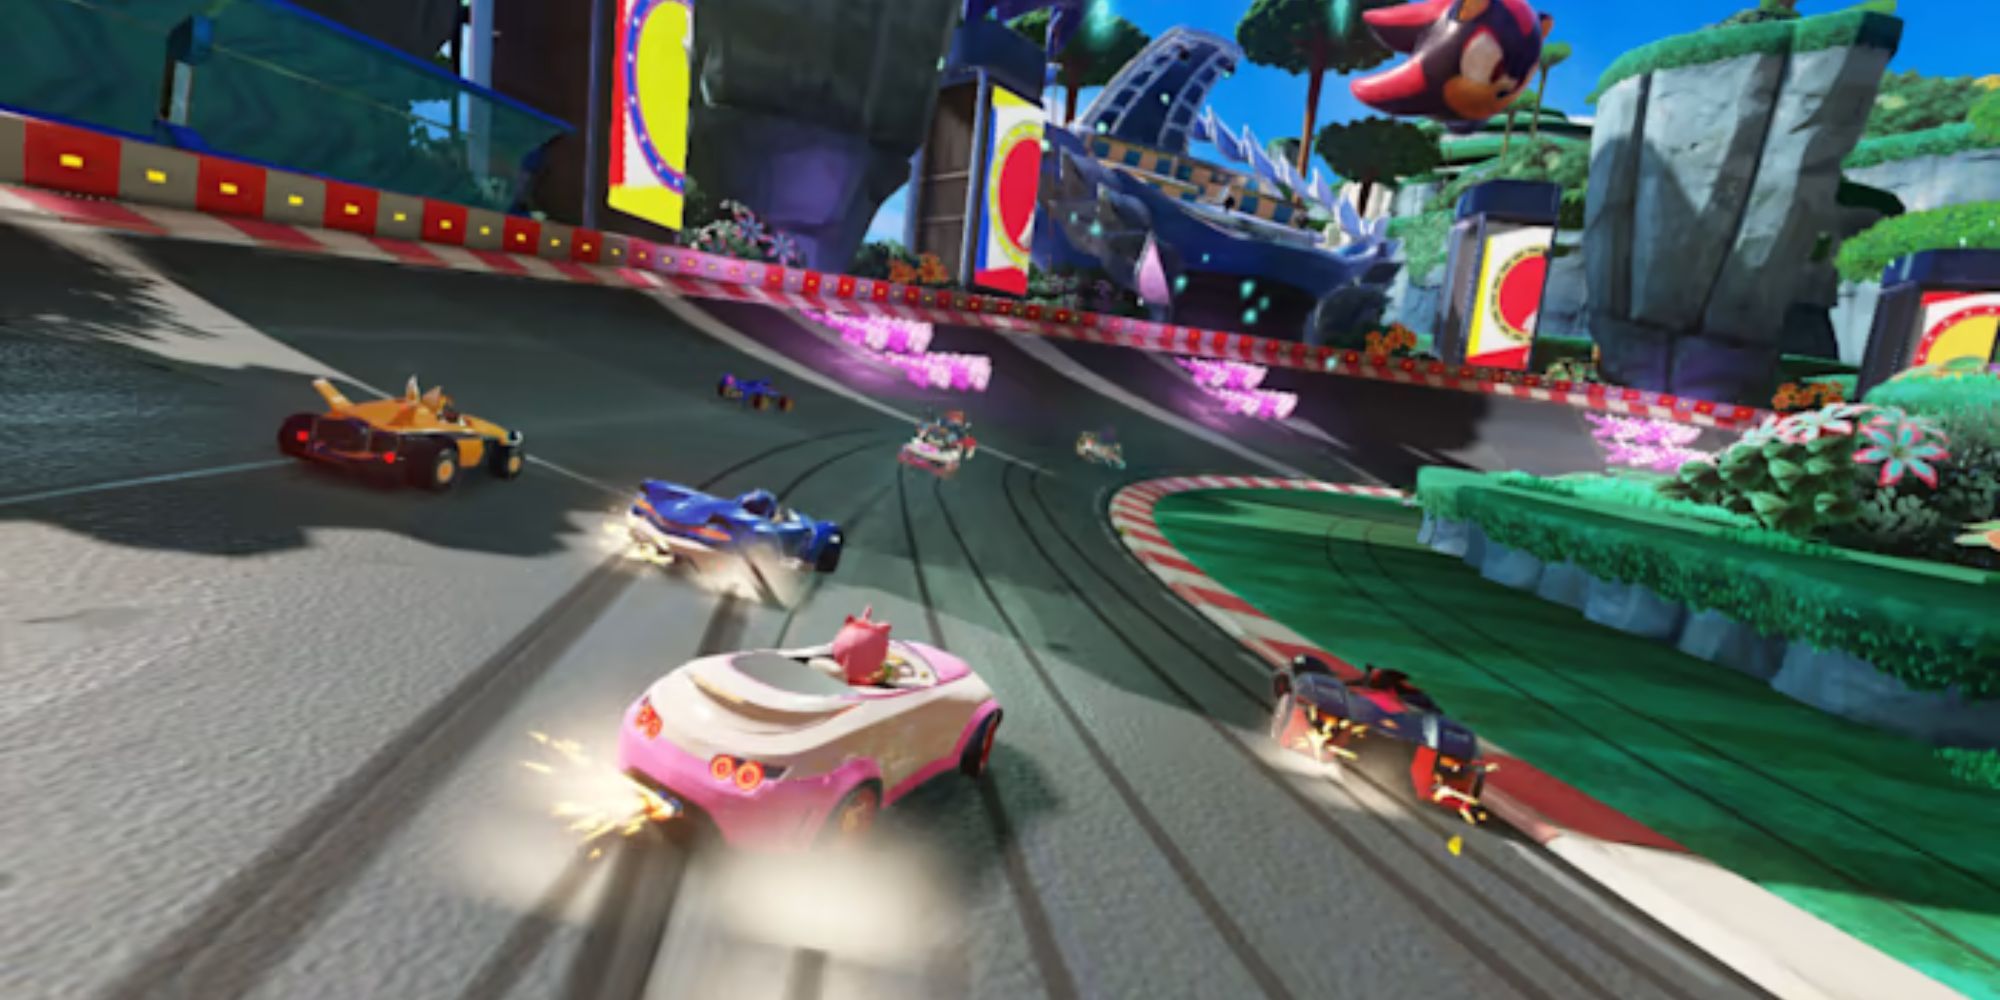 Amy drifts behind Shadow, Sonic, and Tails on a racetrack